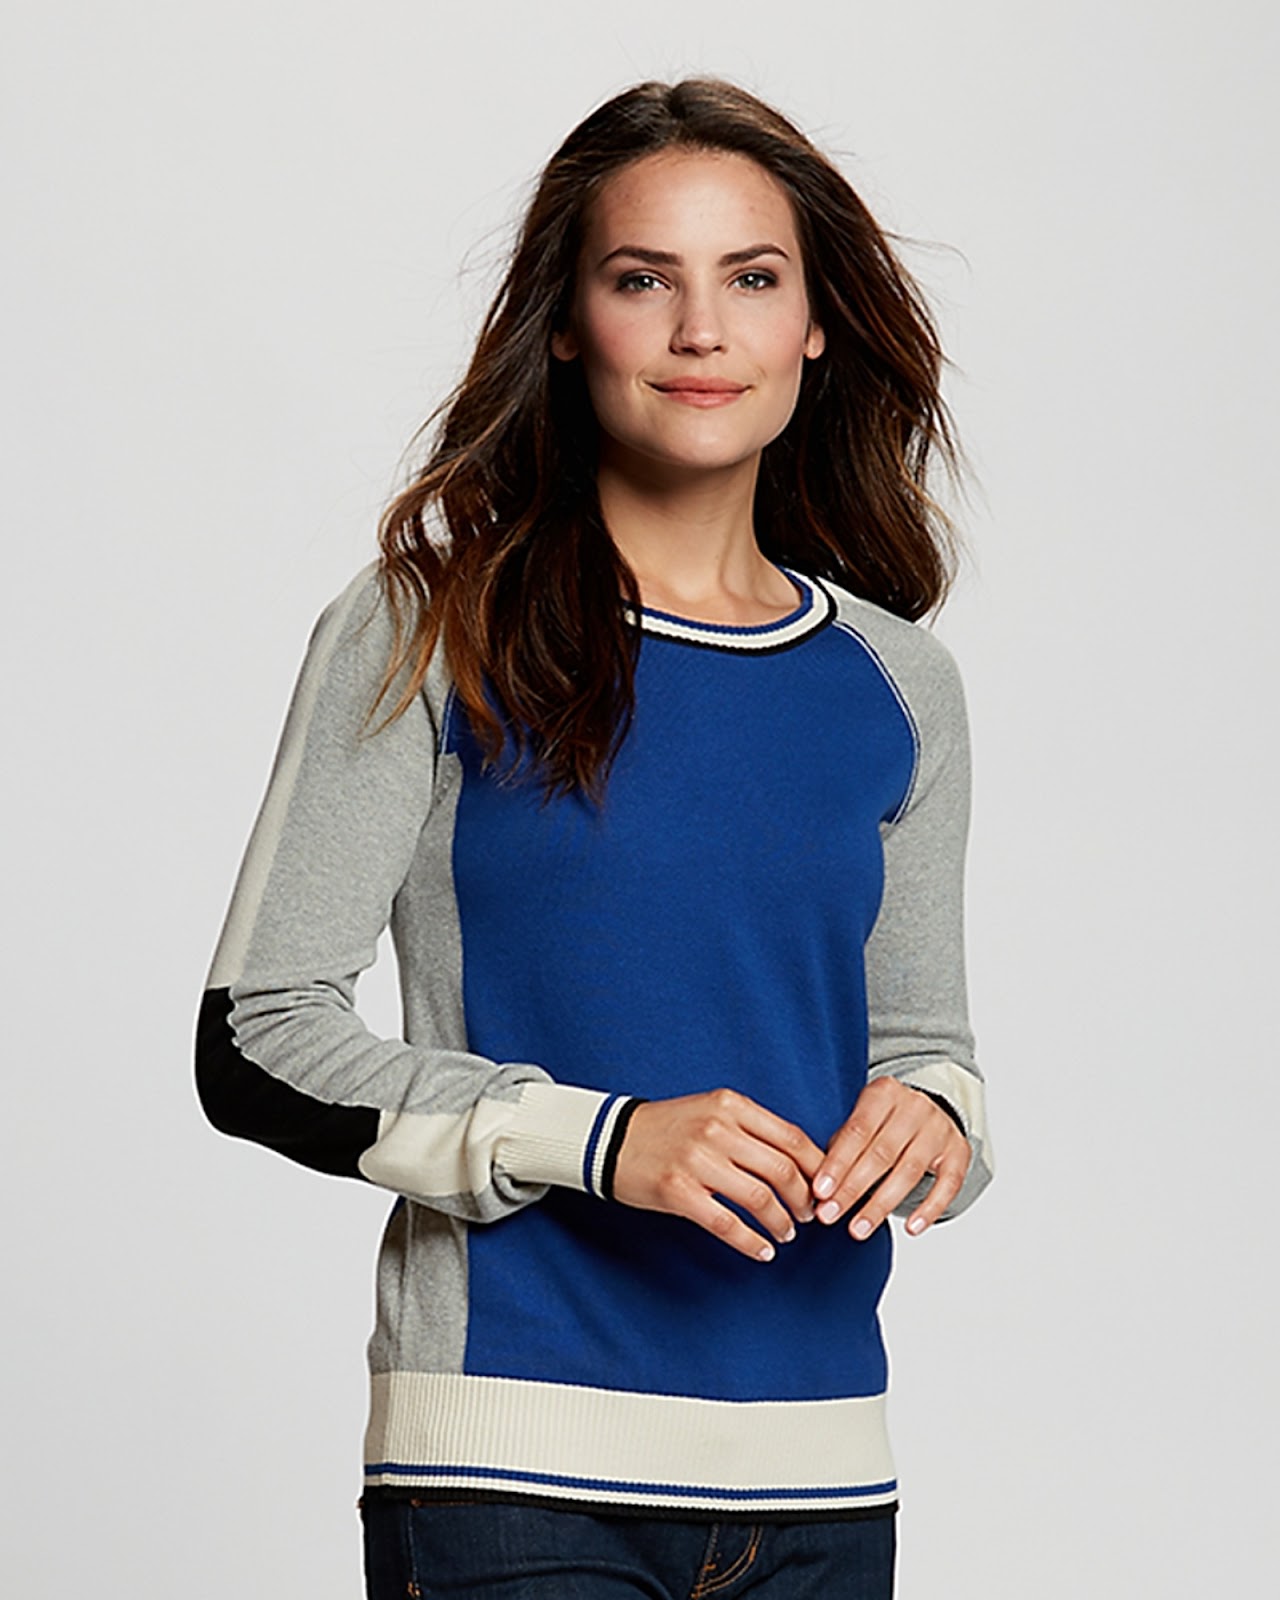 Woman wearing Cutter & Buck Womens Stride Colorblock Sweater in Tour Blue/Blue and Grey